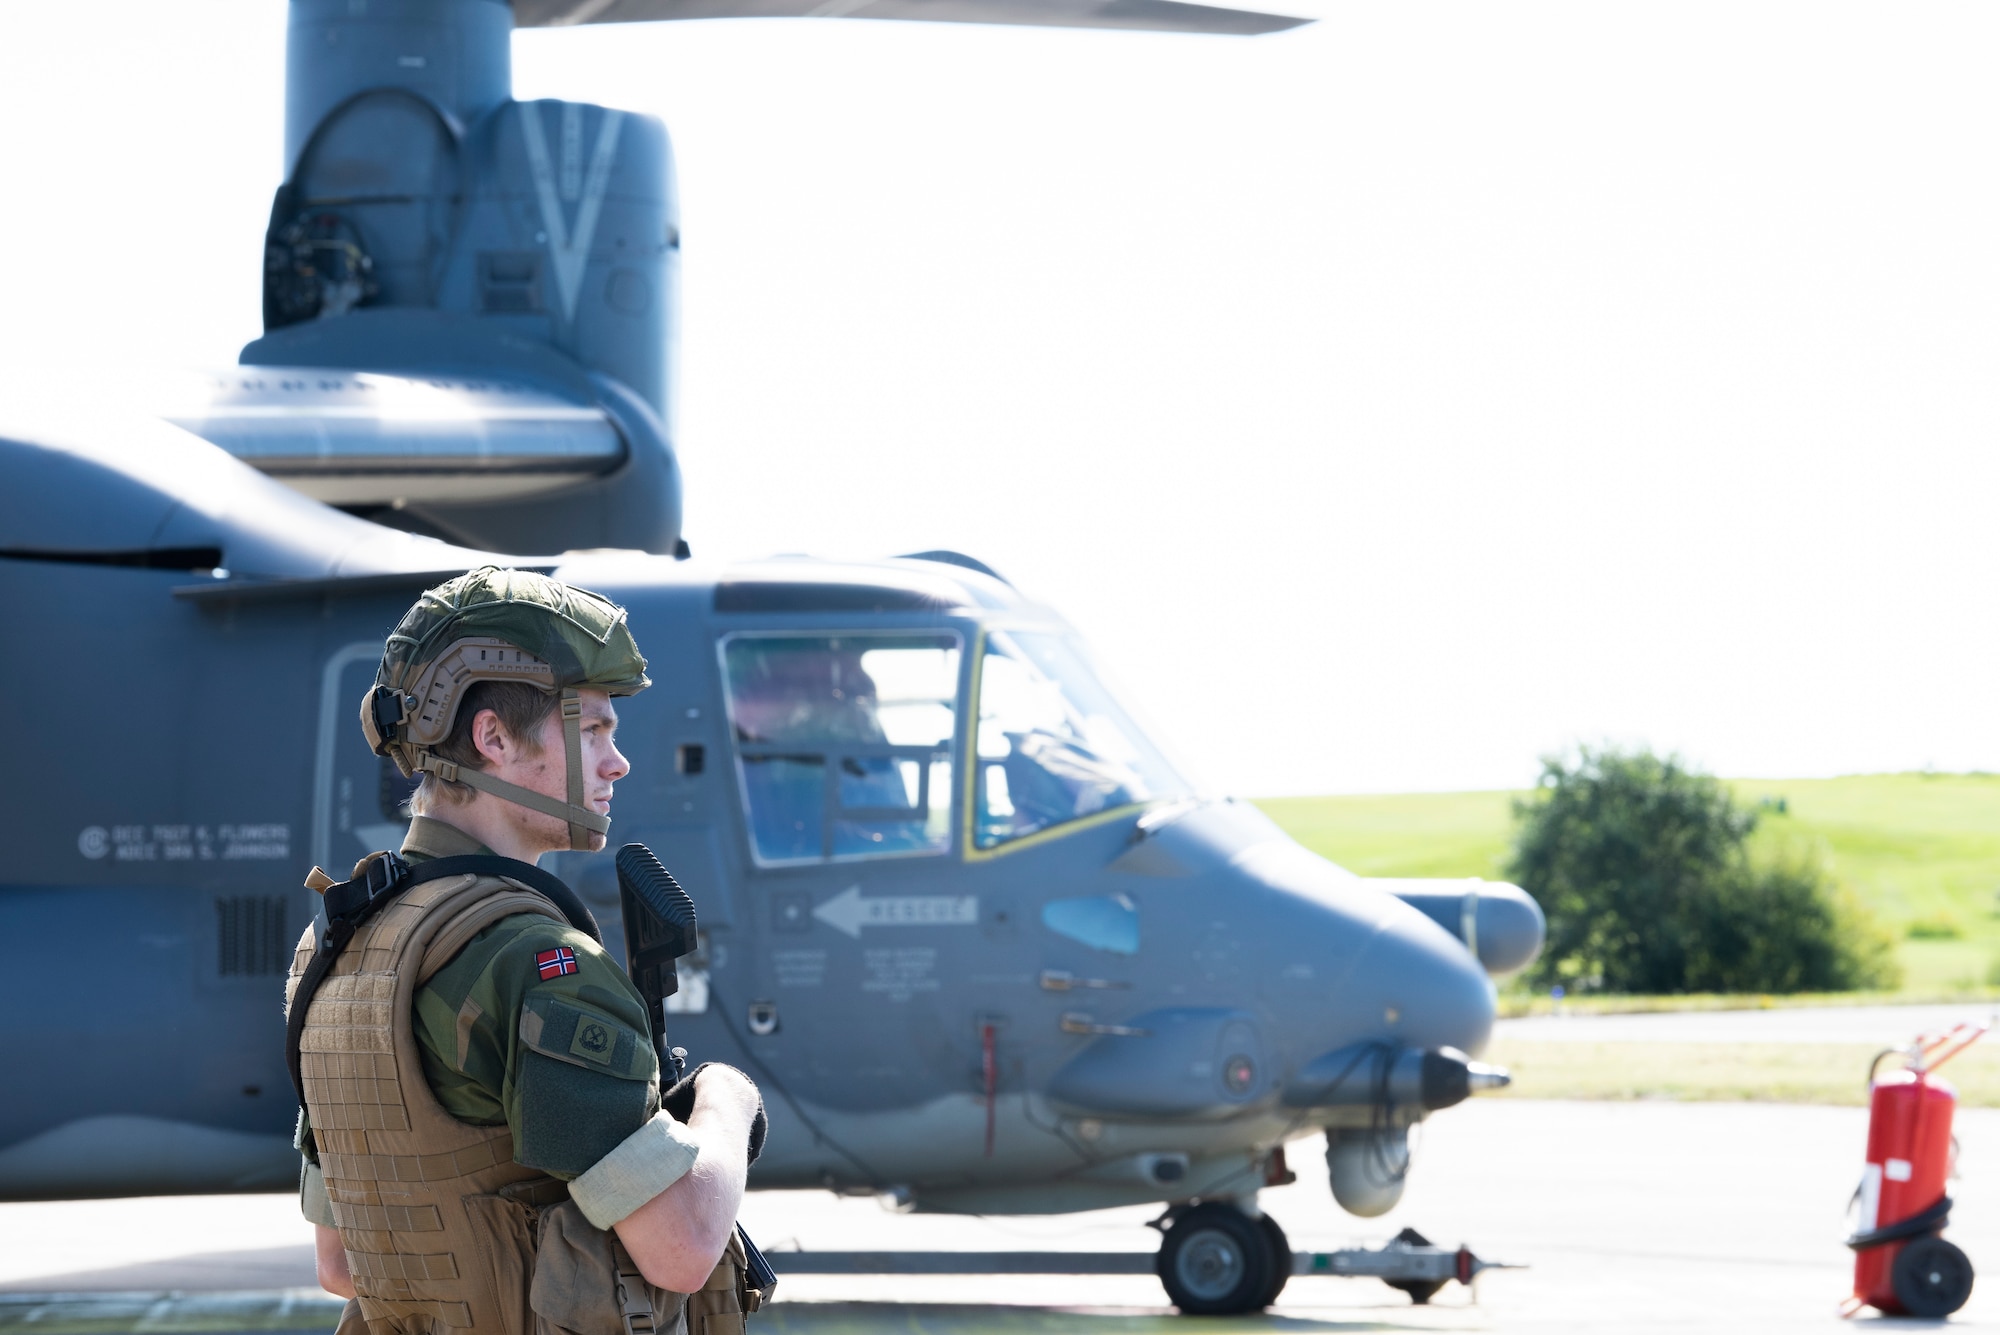 A Norwegian military member stands guard in front of a CV-22B Osprey, based out of RAF Milden-hall, U.K., during a training mission at Rygge Air Station, Norway, August 25, 2020. Integration with the Norwegian Air Force allowed the 352d Special Operations Wing to enhance and strengthen bonds with our partner nation and further secure the strategic high-north region. The exercise provided train-ing for 352d Special Operations Wing members on capabilities such as personnel recovery, forward area refueling point, aerial refueling, maritime craft delivery system, and fast rope training. (U.S. Air Force photo by Staff Sgt. Michael Washburn)